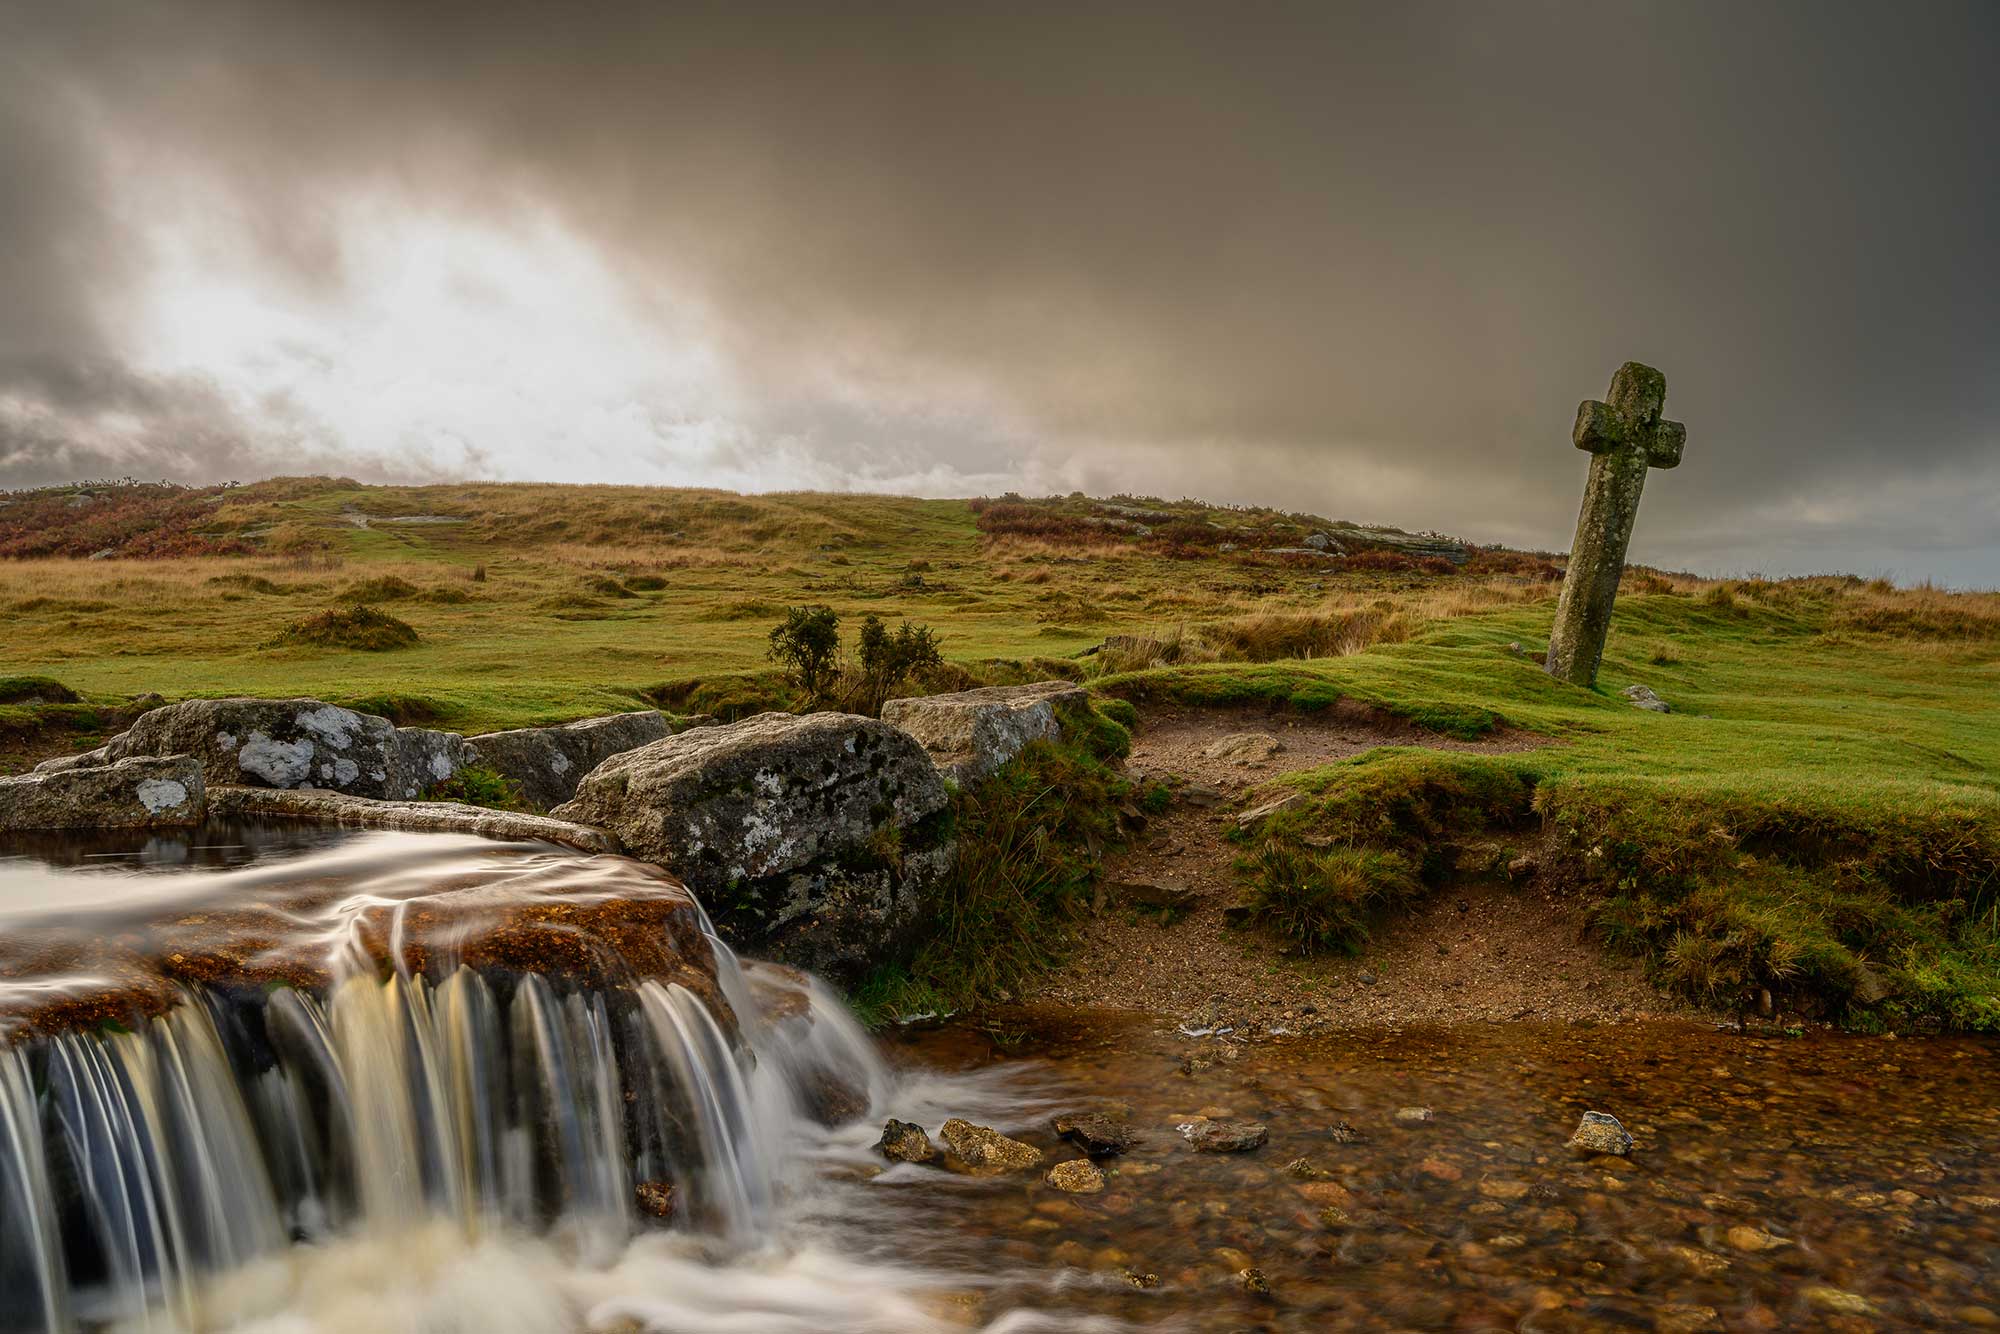 A photograph of a moorland landscape with a small waterfall flowing into a stream, and a vertical stone cross positioned alongside the water.